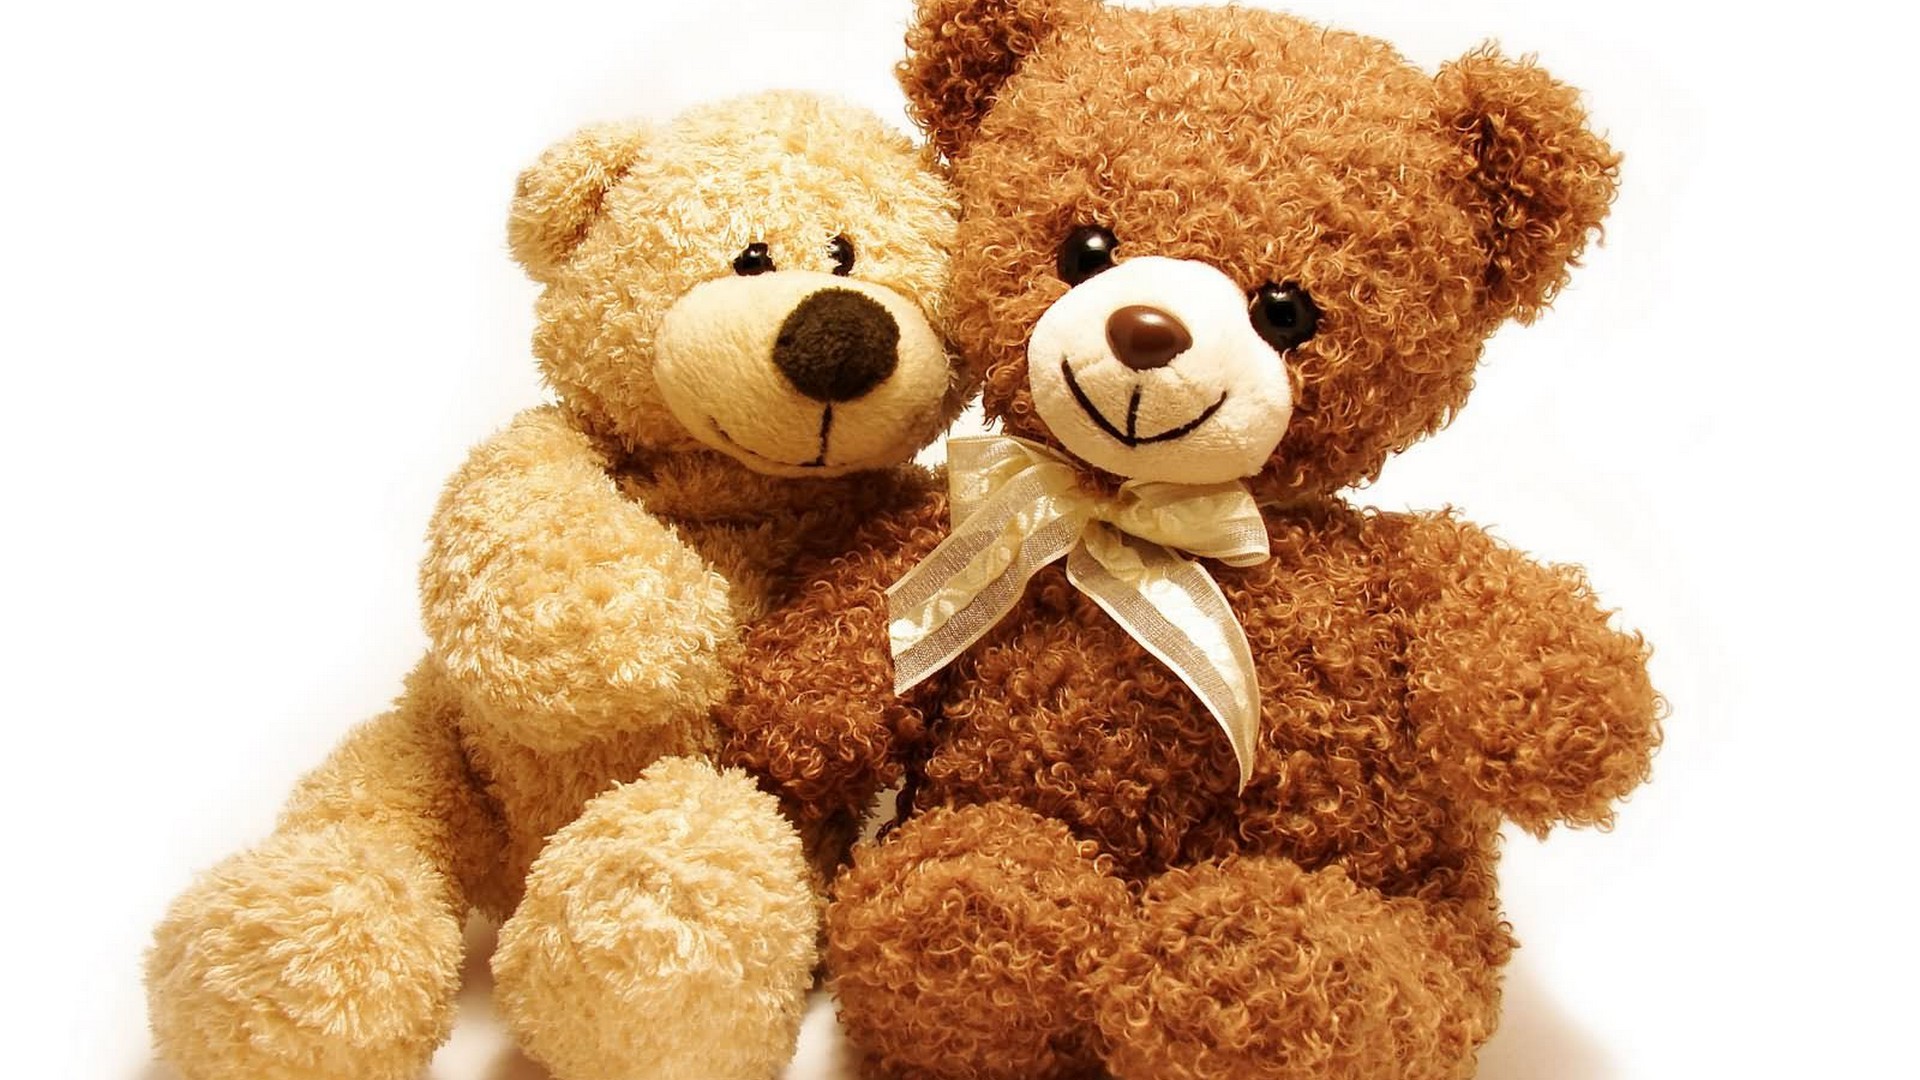 Best Big Teddy Bear Wallpaper with image resolution 1920x1080 pixel. You can use this wallpaper as background for your desktop Computer Screensavers, Android or iPhone smartphones